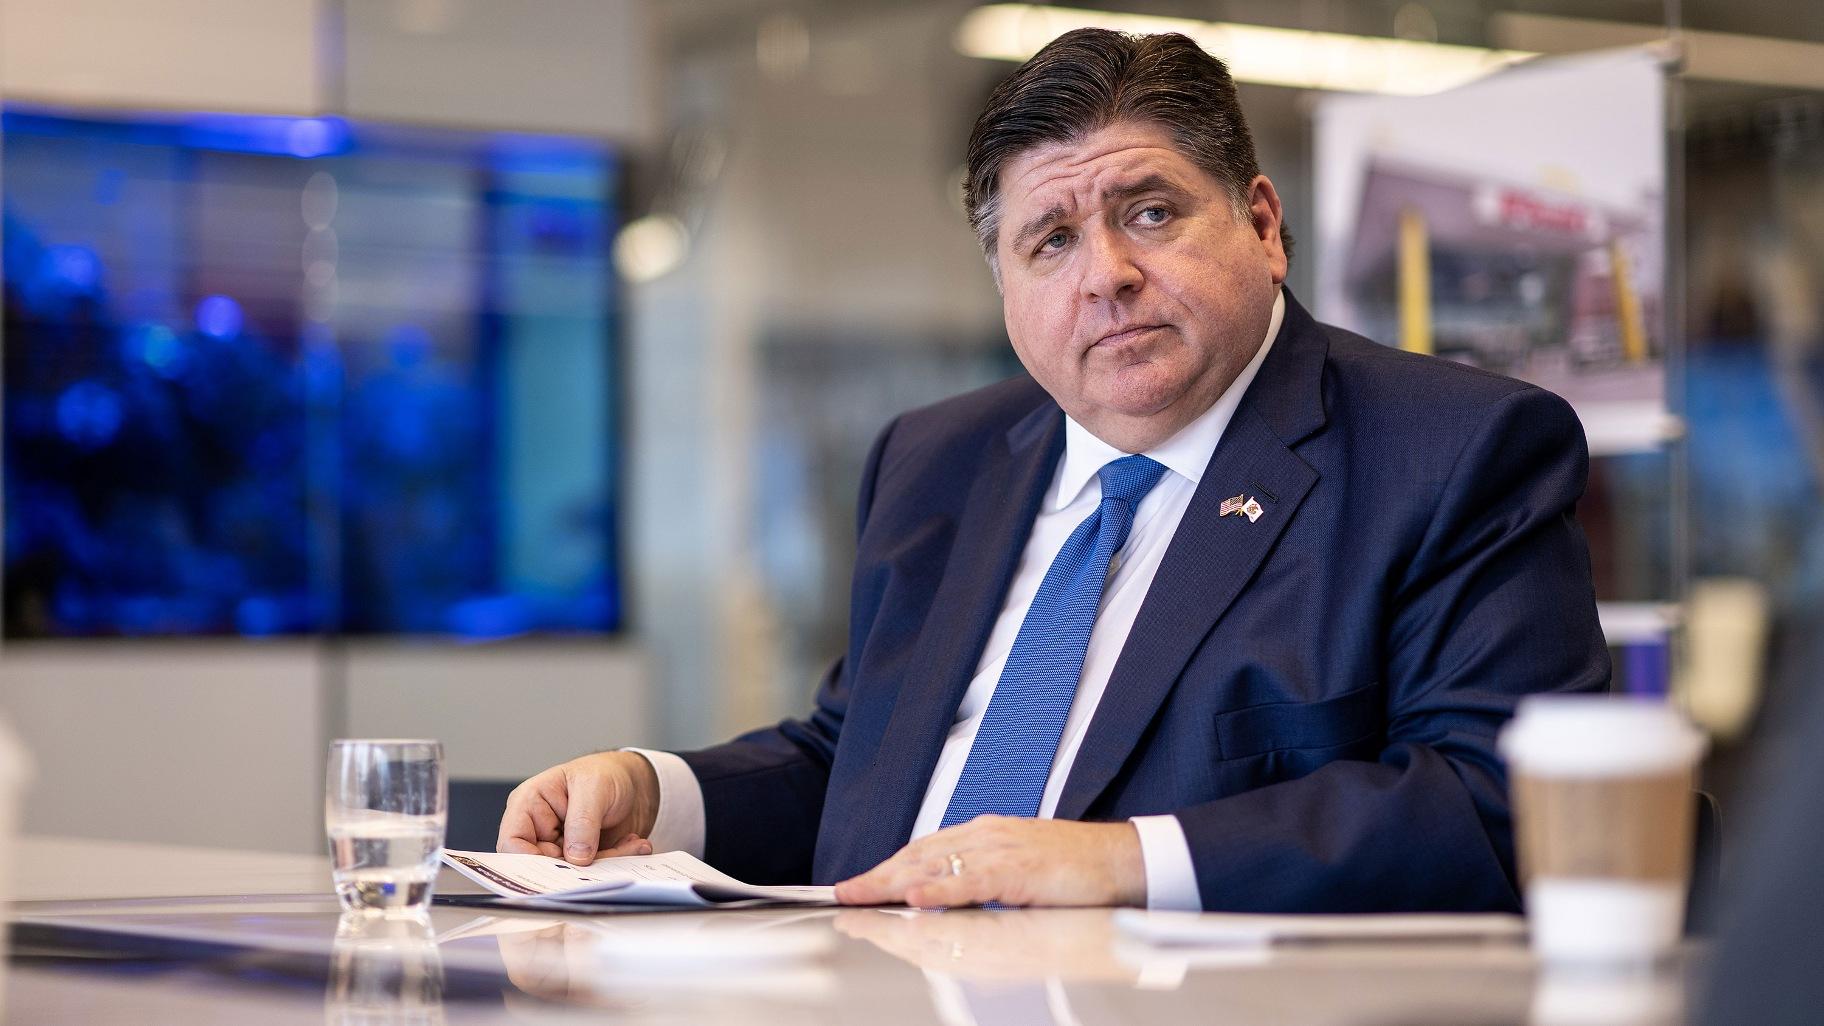 “We should put the right to choose on every ballot,” Illinois Gov. J.B. Pritzker said. (Christopher Dilts / Bloomberg / Getty Images)